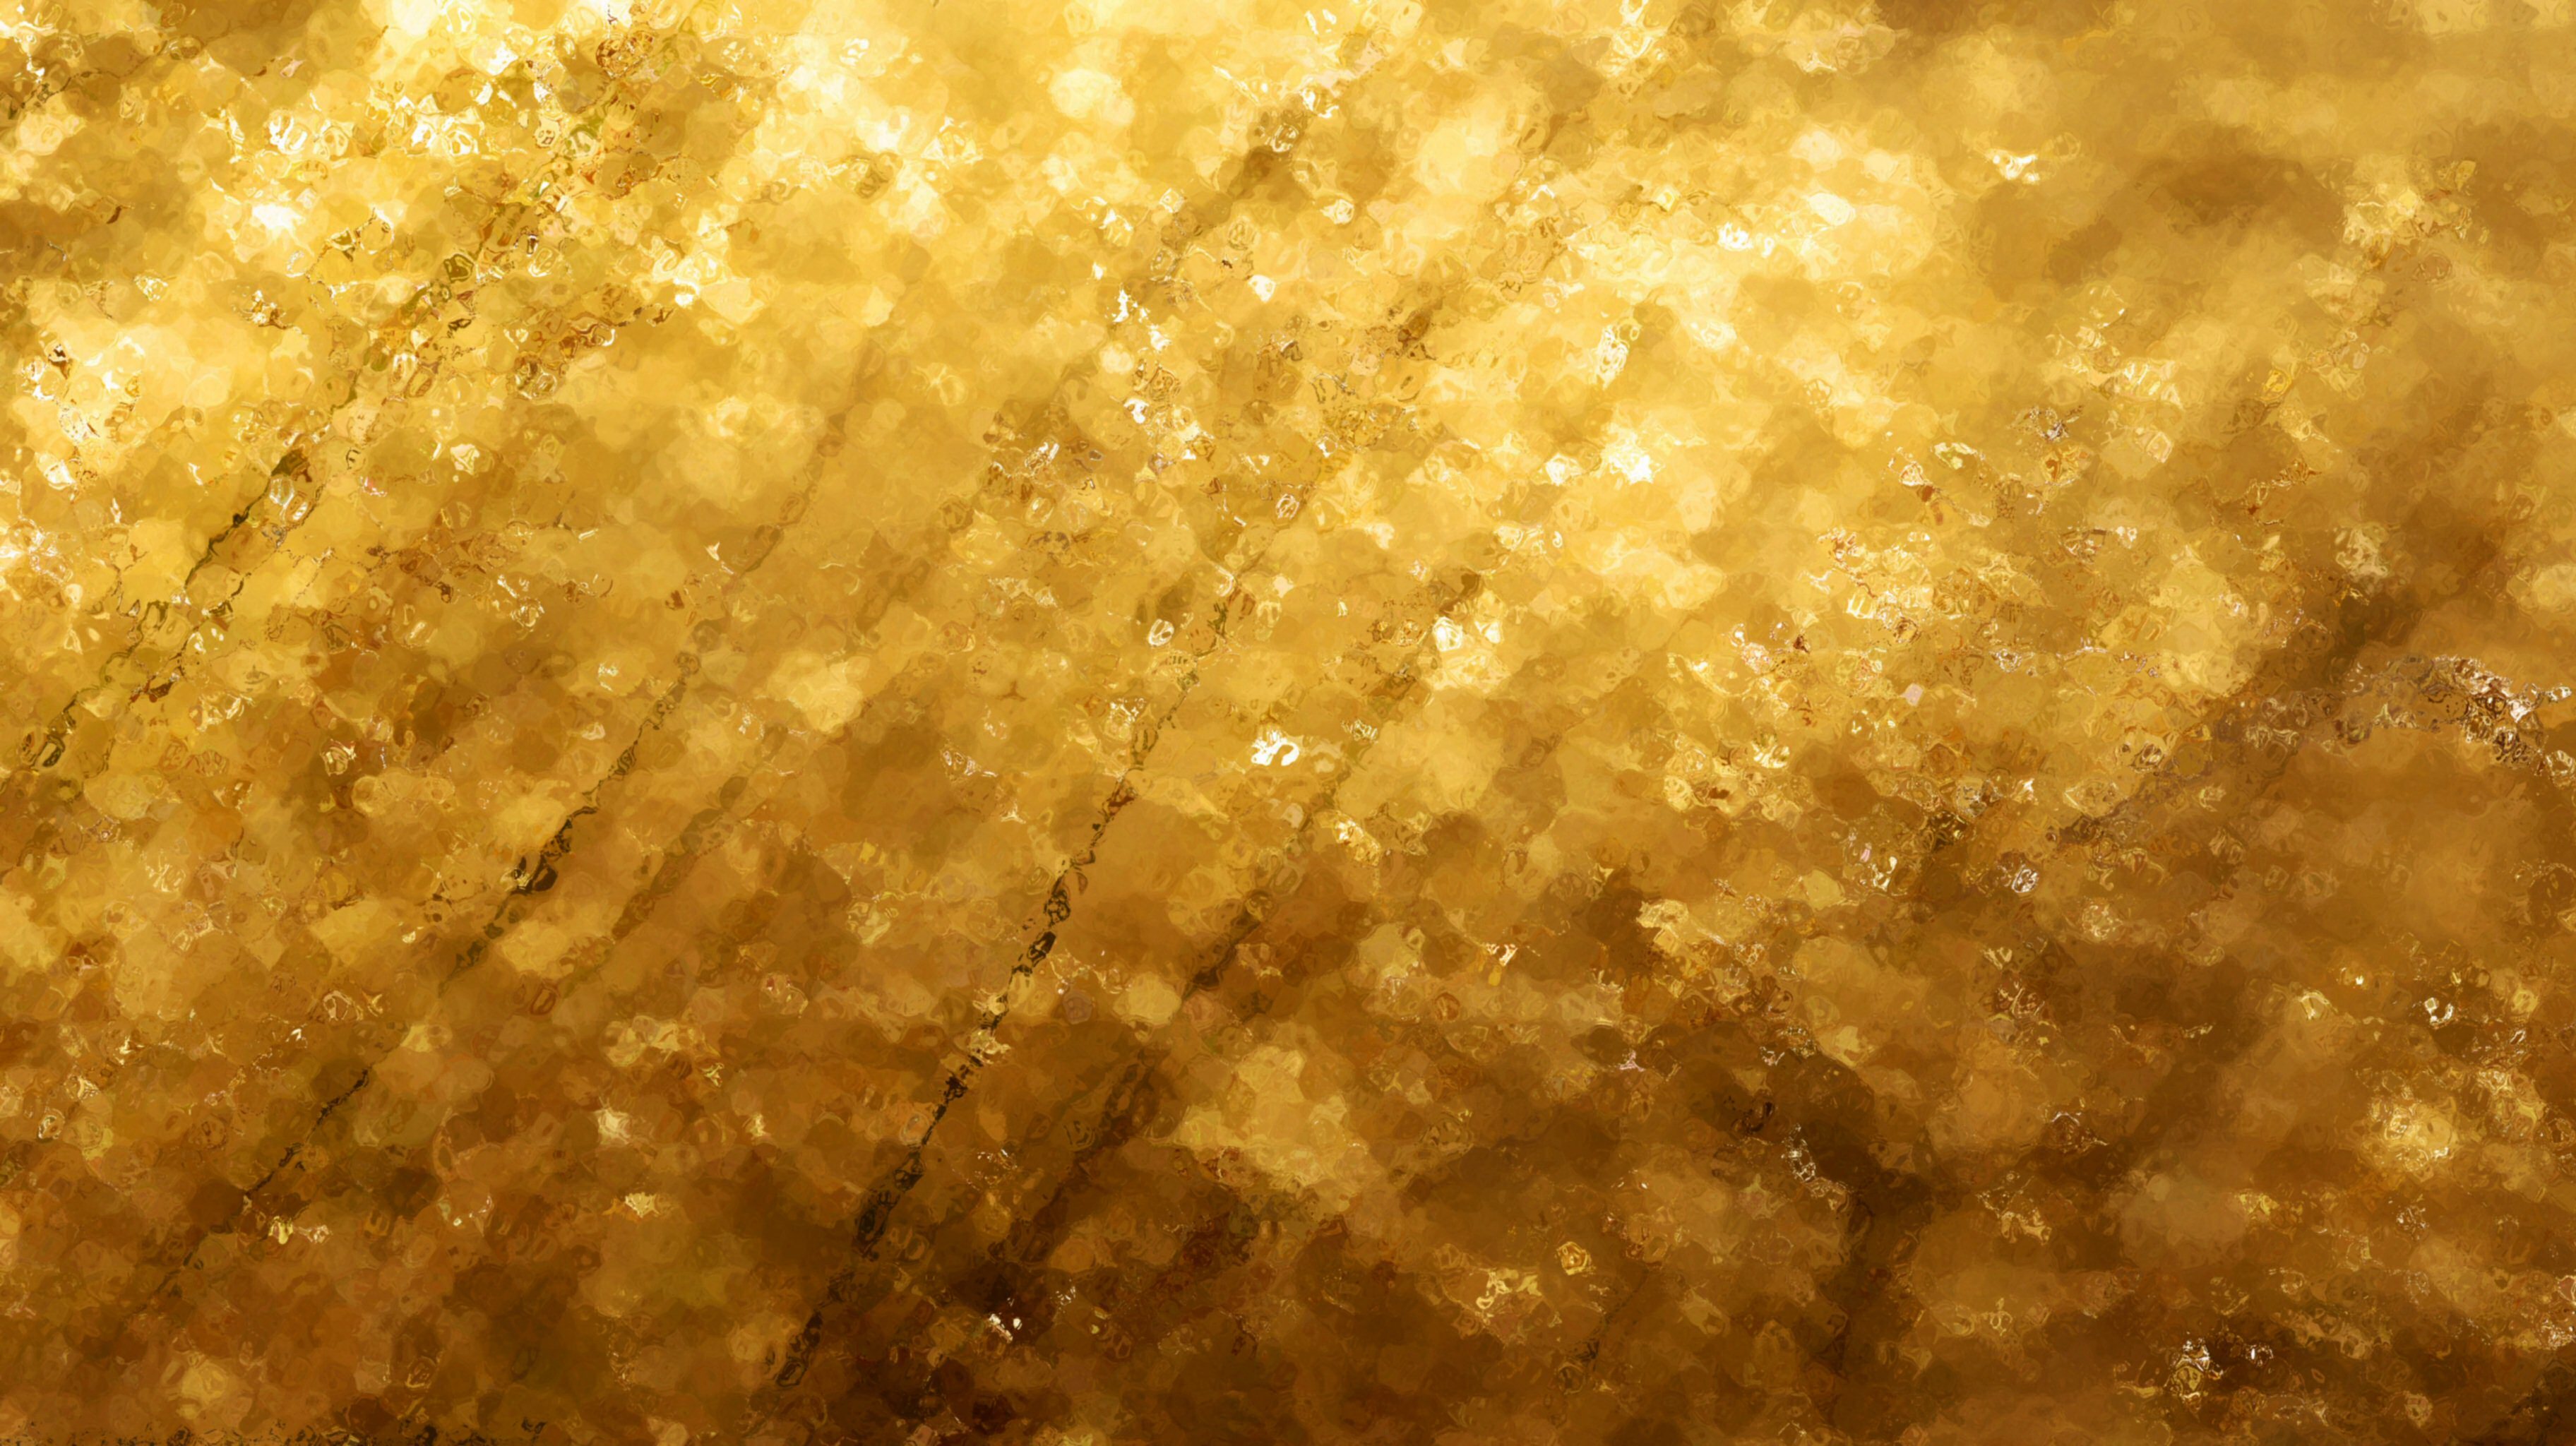 Gold Texture Background